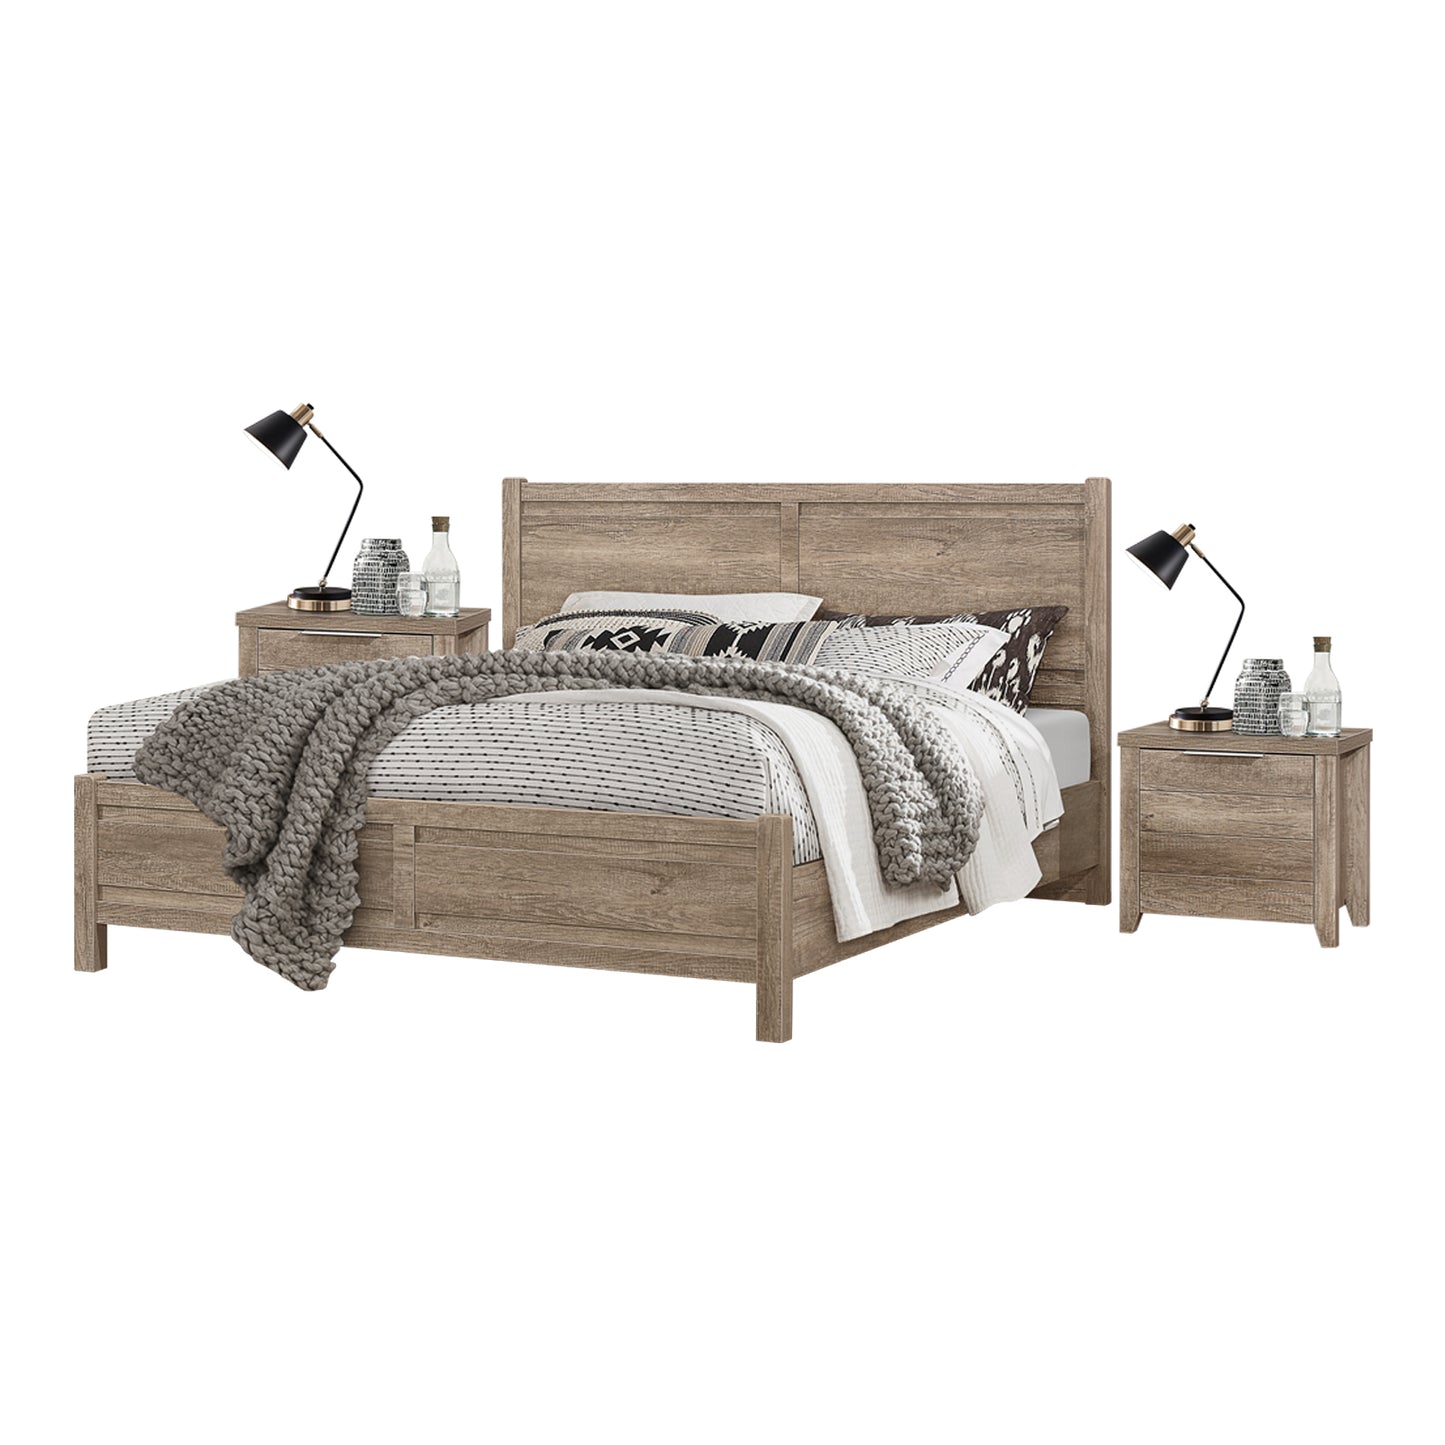 3 Pieces Bedroom Suite Natural Wood Like MDF Structure Queen Size Oak Colour Bed, Bedside Table